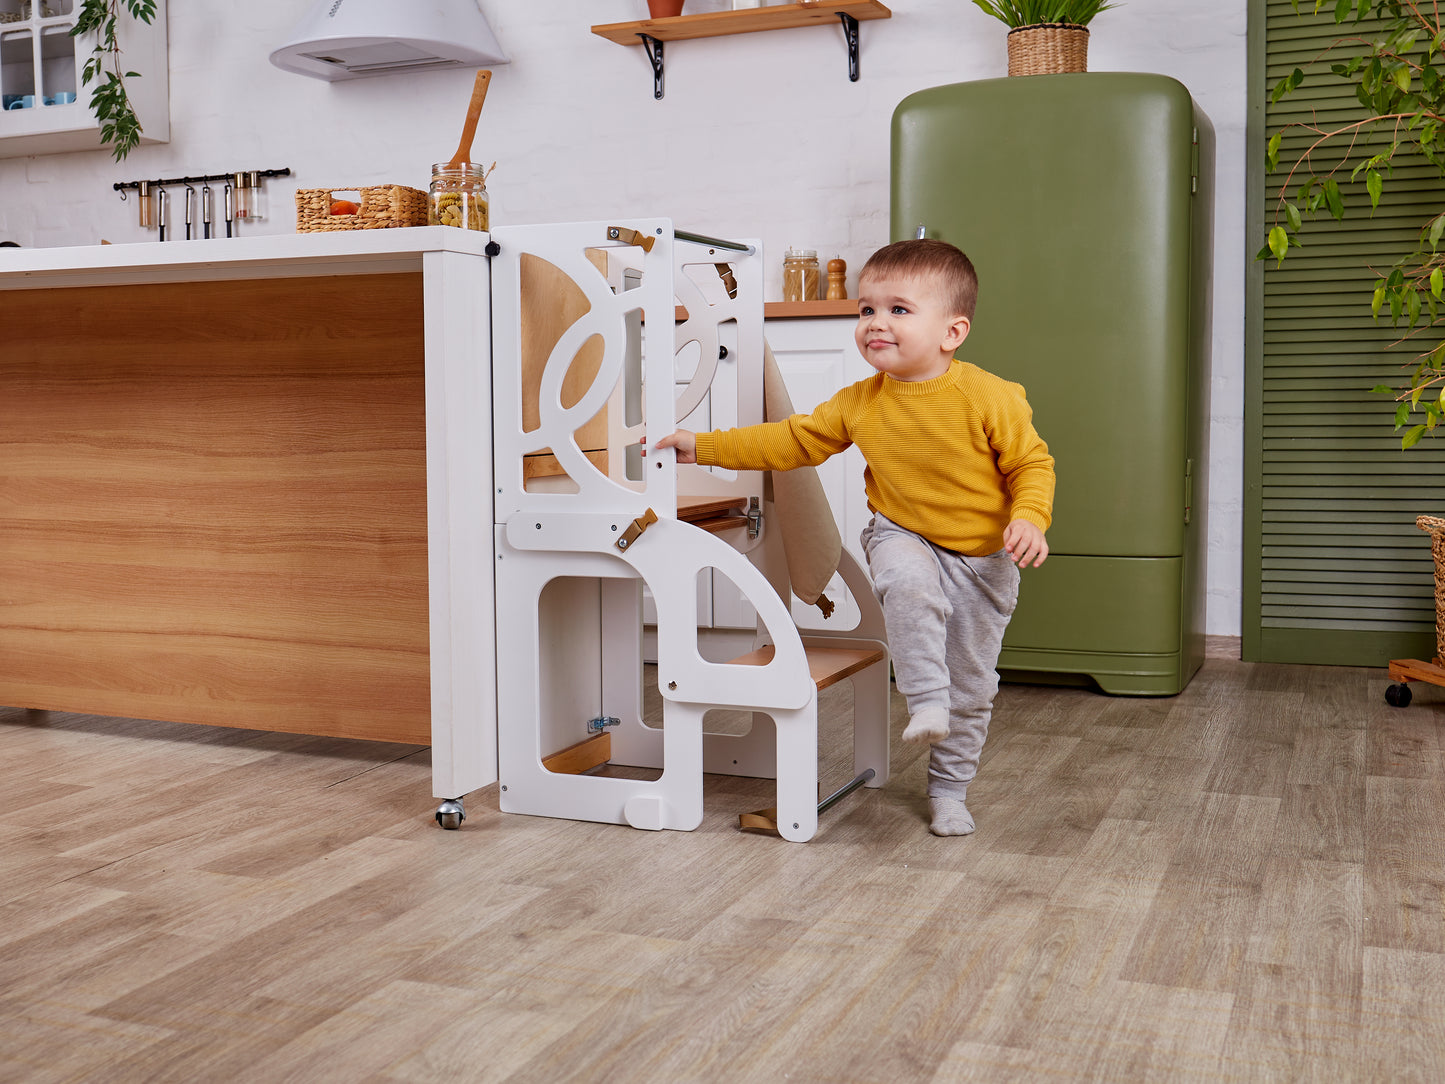 White Step stool with back Learning toddler tower table Kitchen helper stool Wooden step stool Kitchen stool Toddler tower Montessori stool